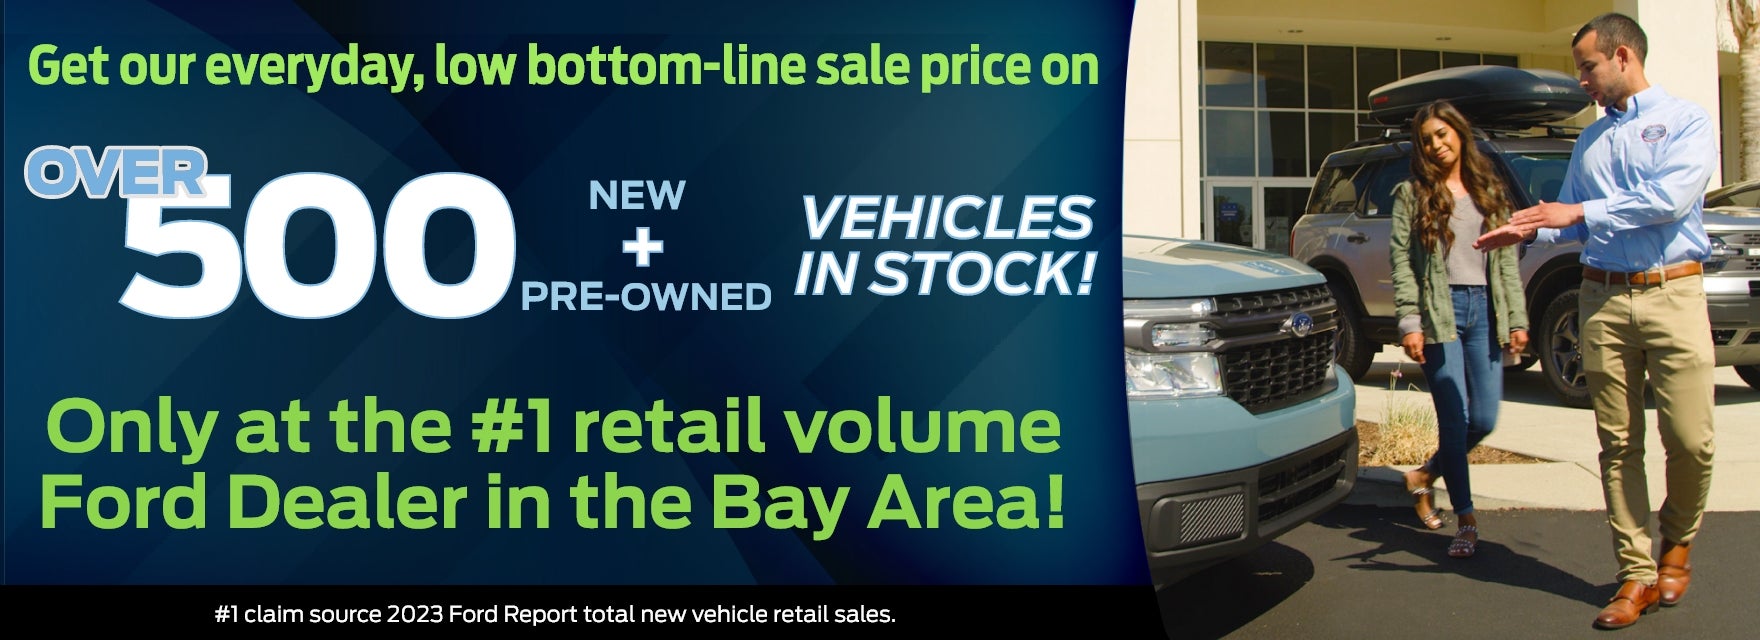 Everyday, low bottom-line sale price on over 600 vehicles